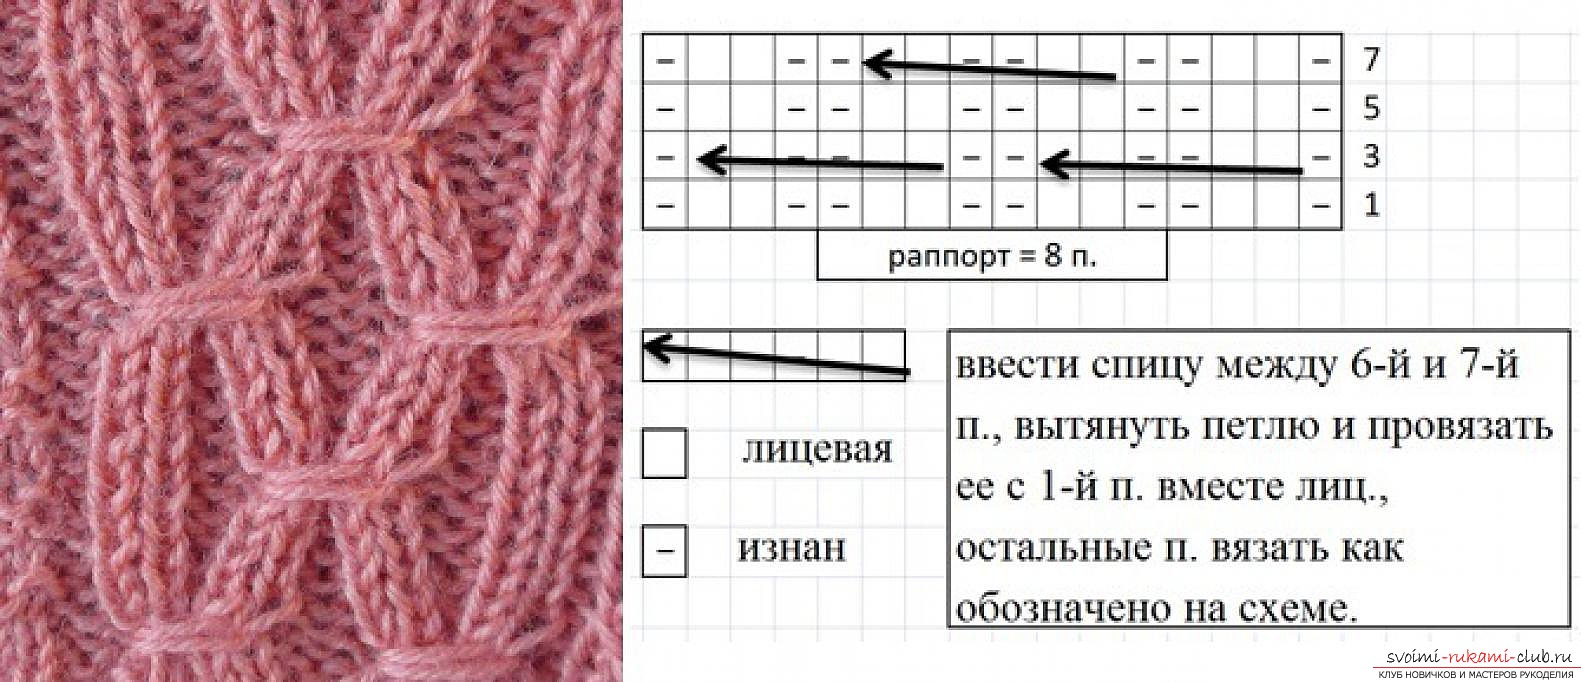 knitted knitting dress with a description of the patterns. Photo №6